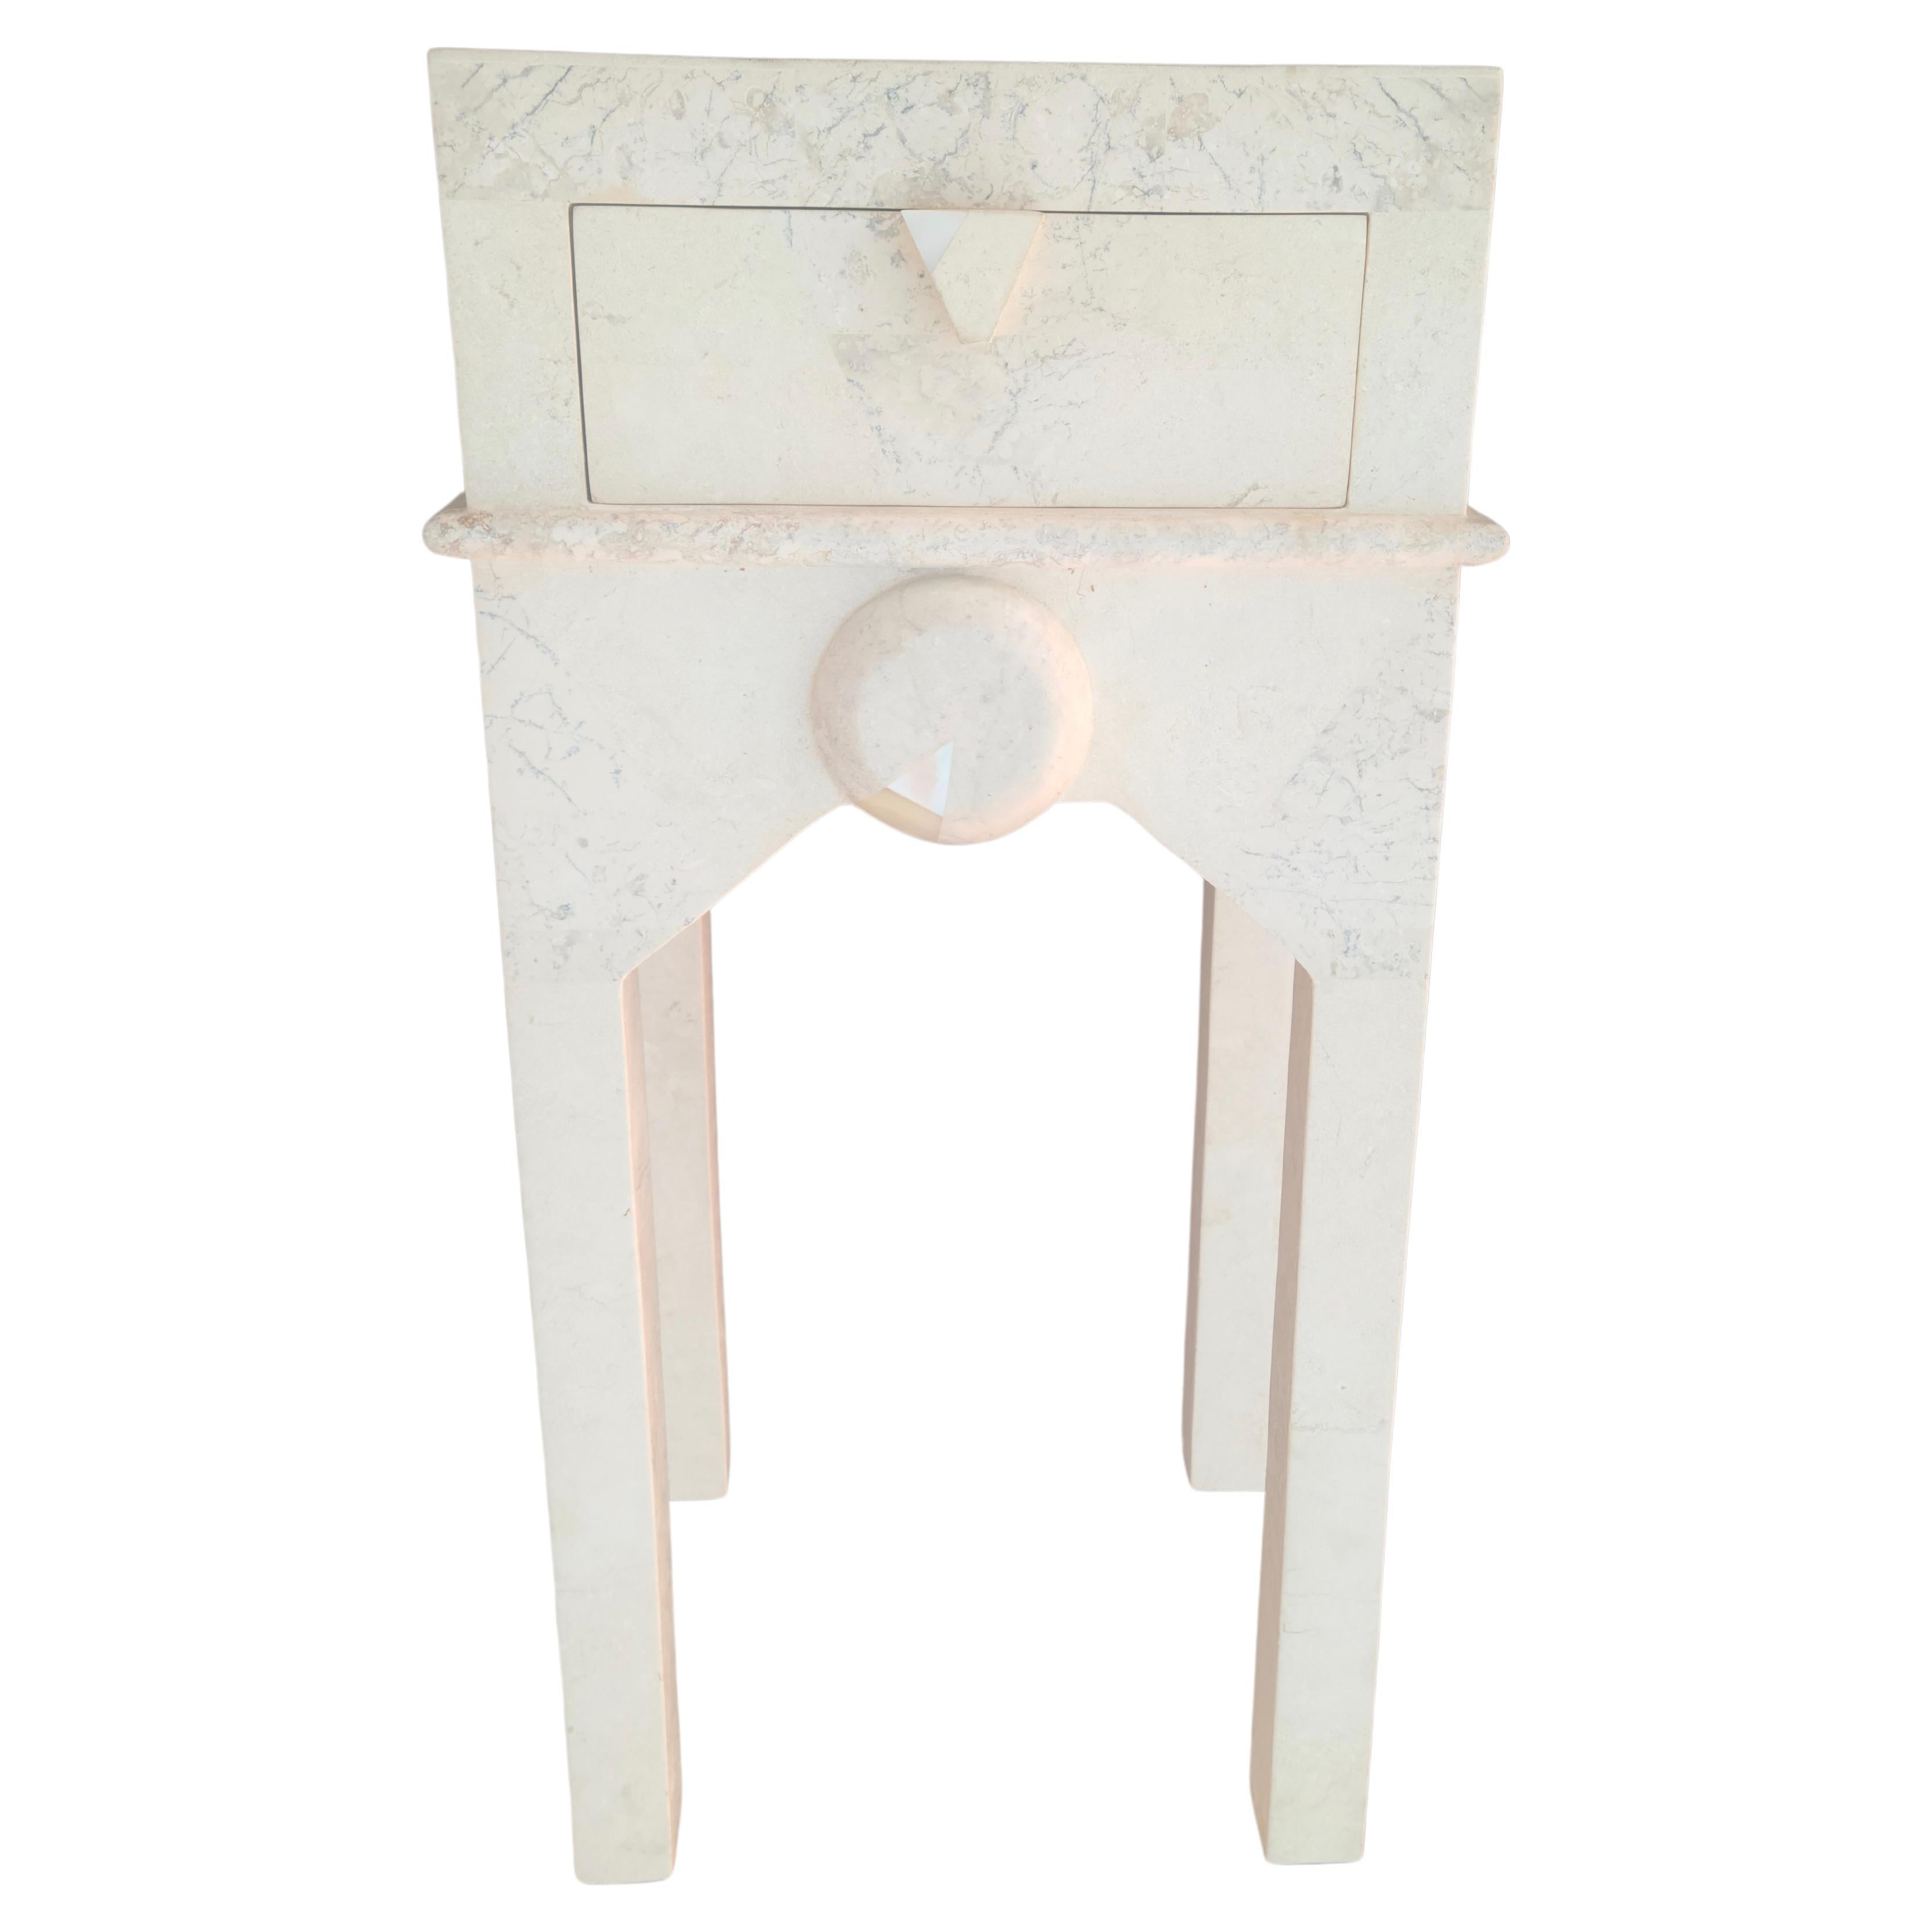 Please feel free to reach out for accurate shipping quote to your location.
This item is somewhat fragile. It may need a crate or in-home delivery depending on your location. 

Single drawer side table.
Tessellated Travertine Stone Surround.
